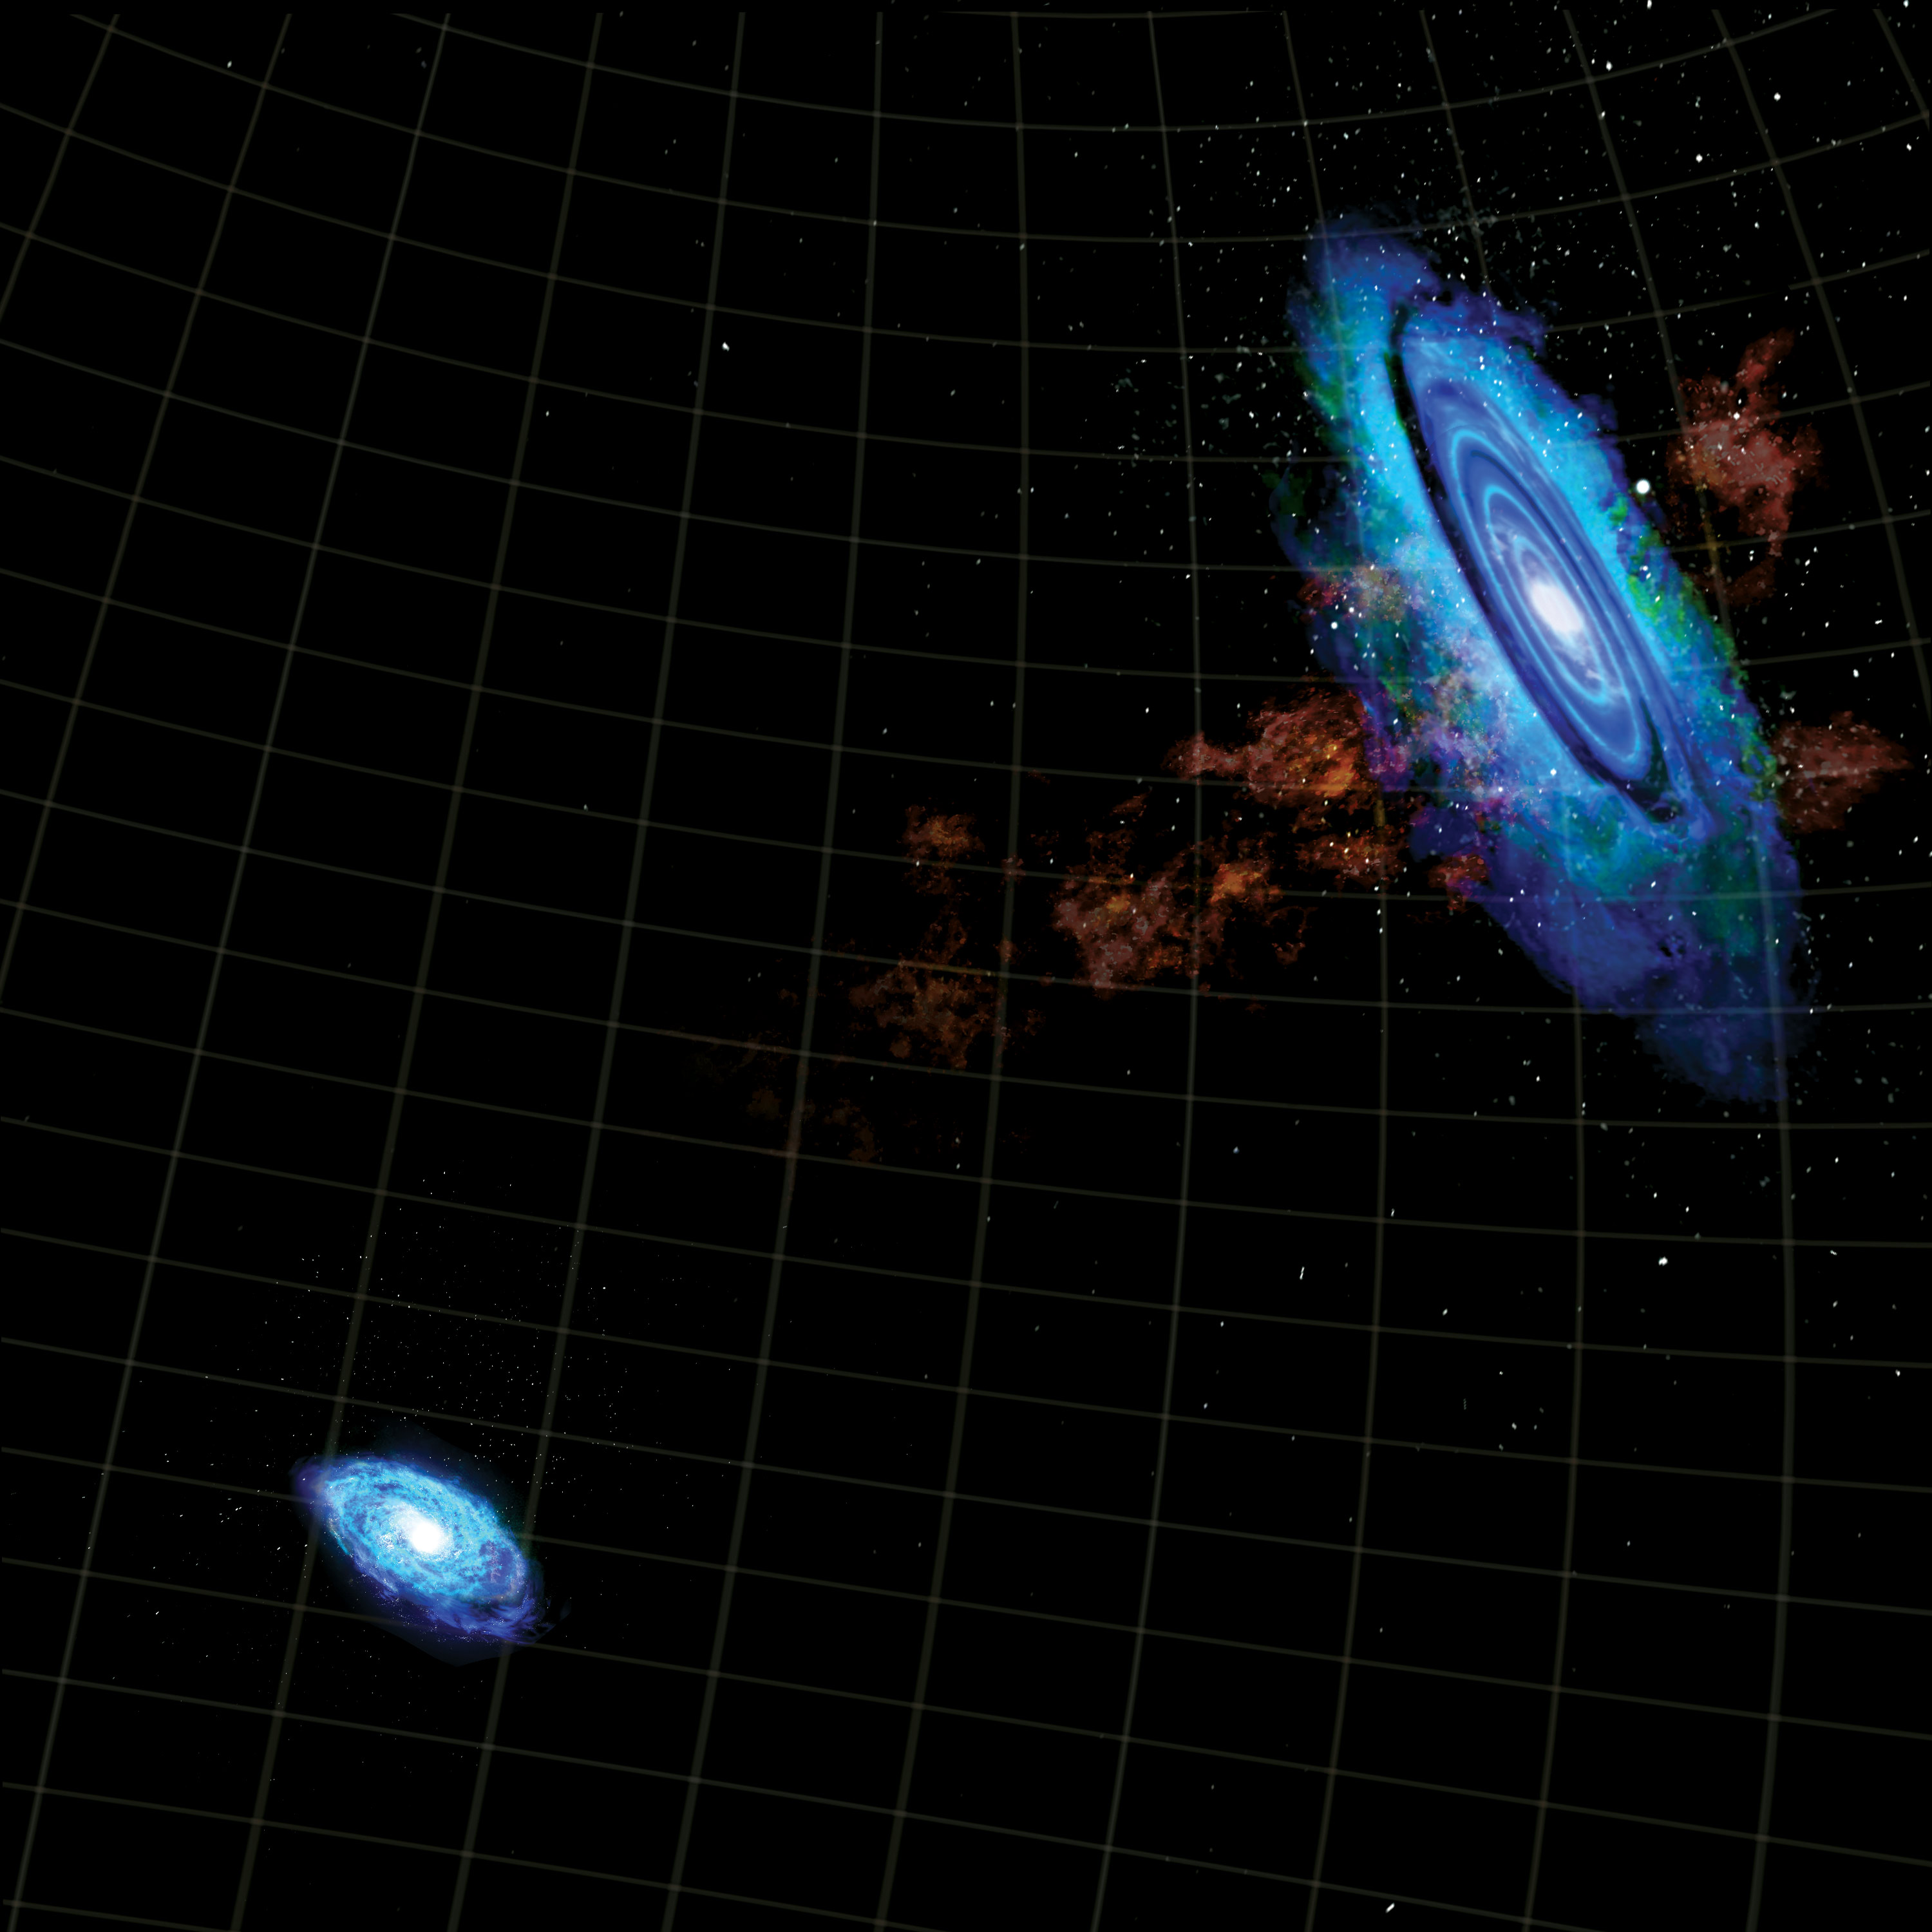 Artist's impression of hydrogen gas connecting M33 and M31